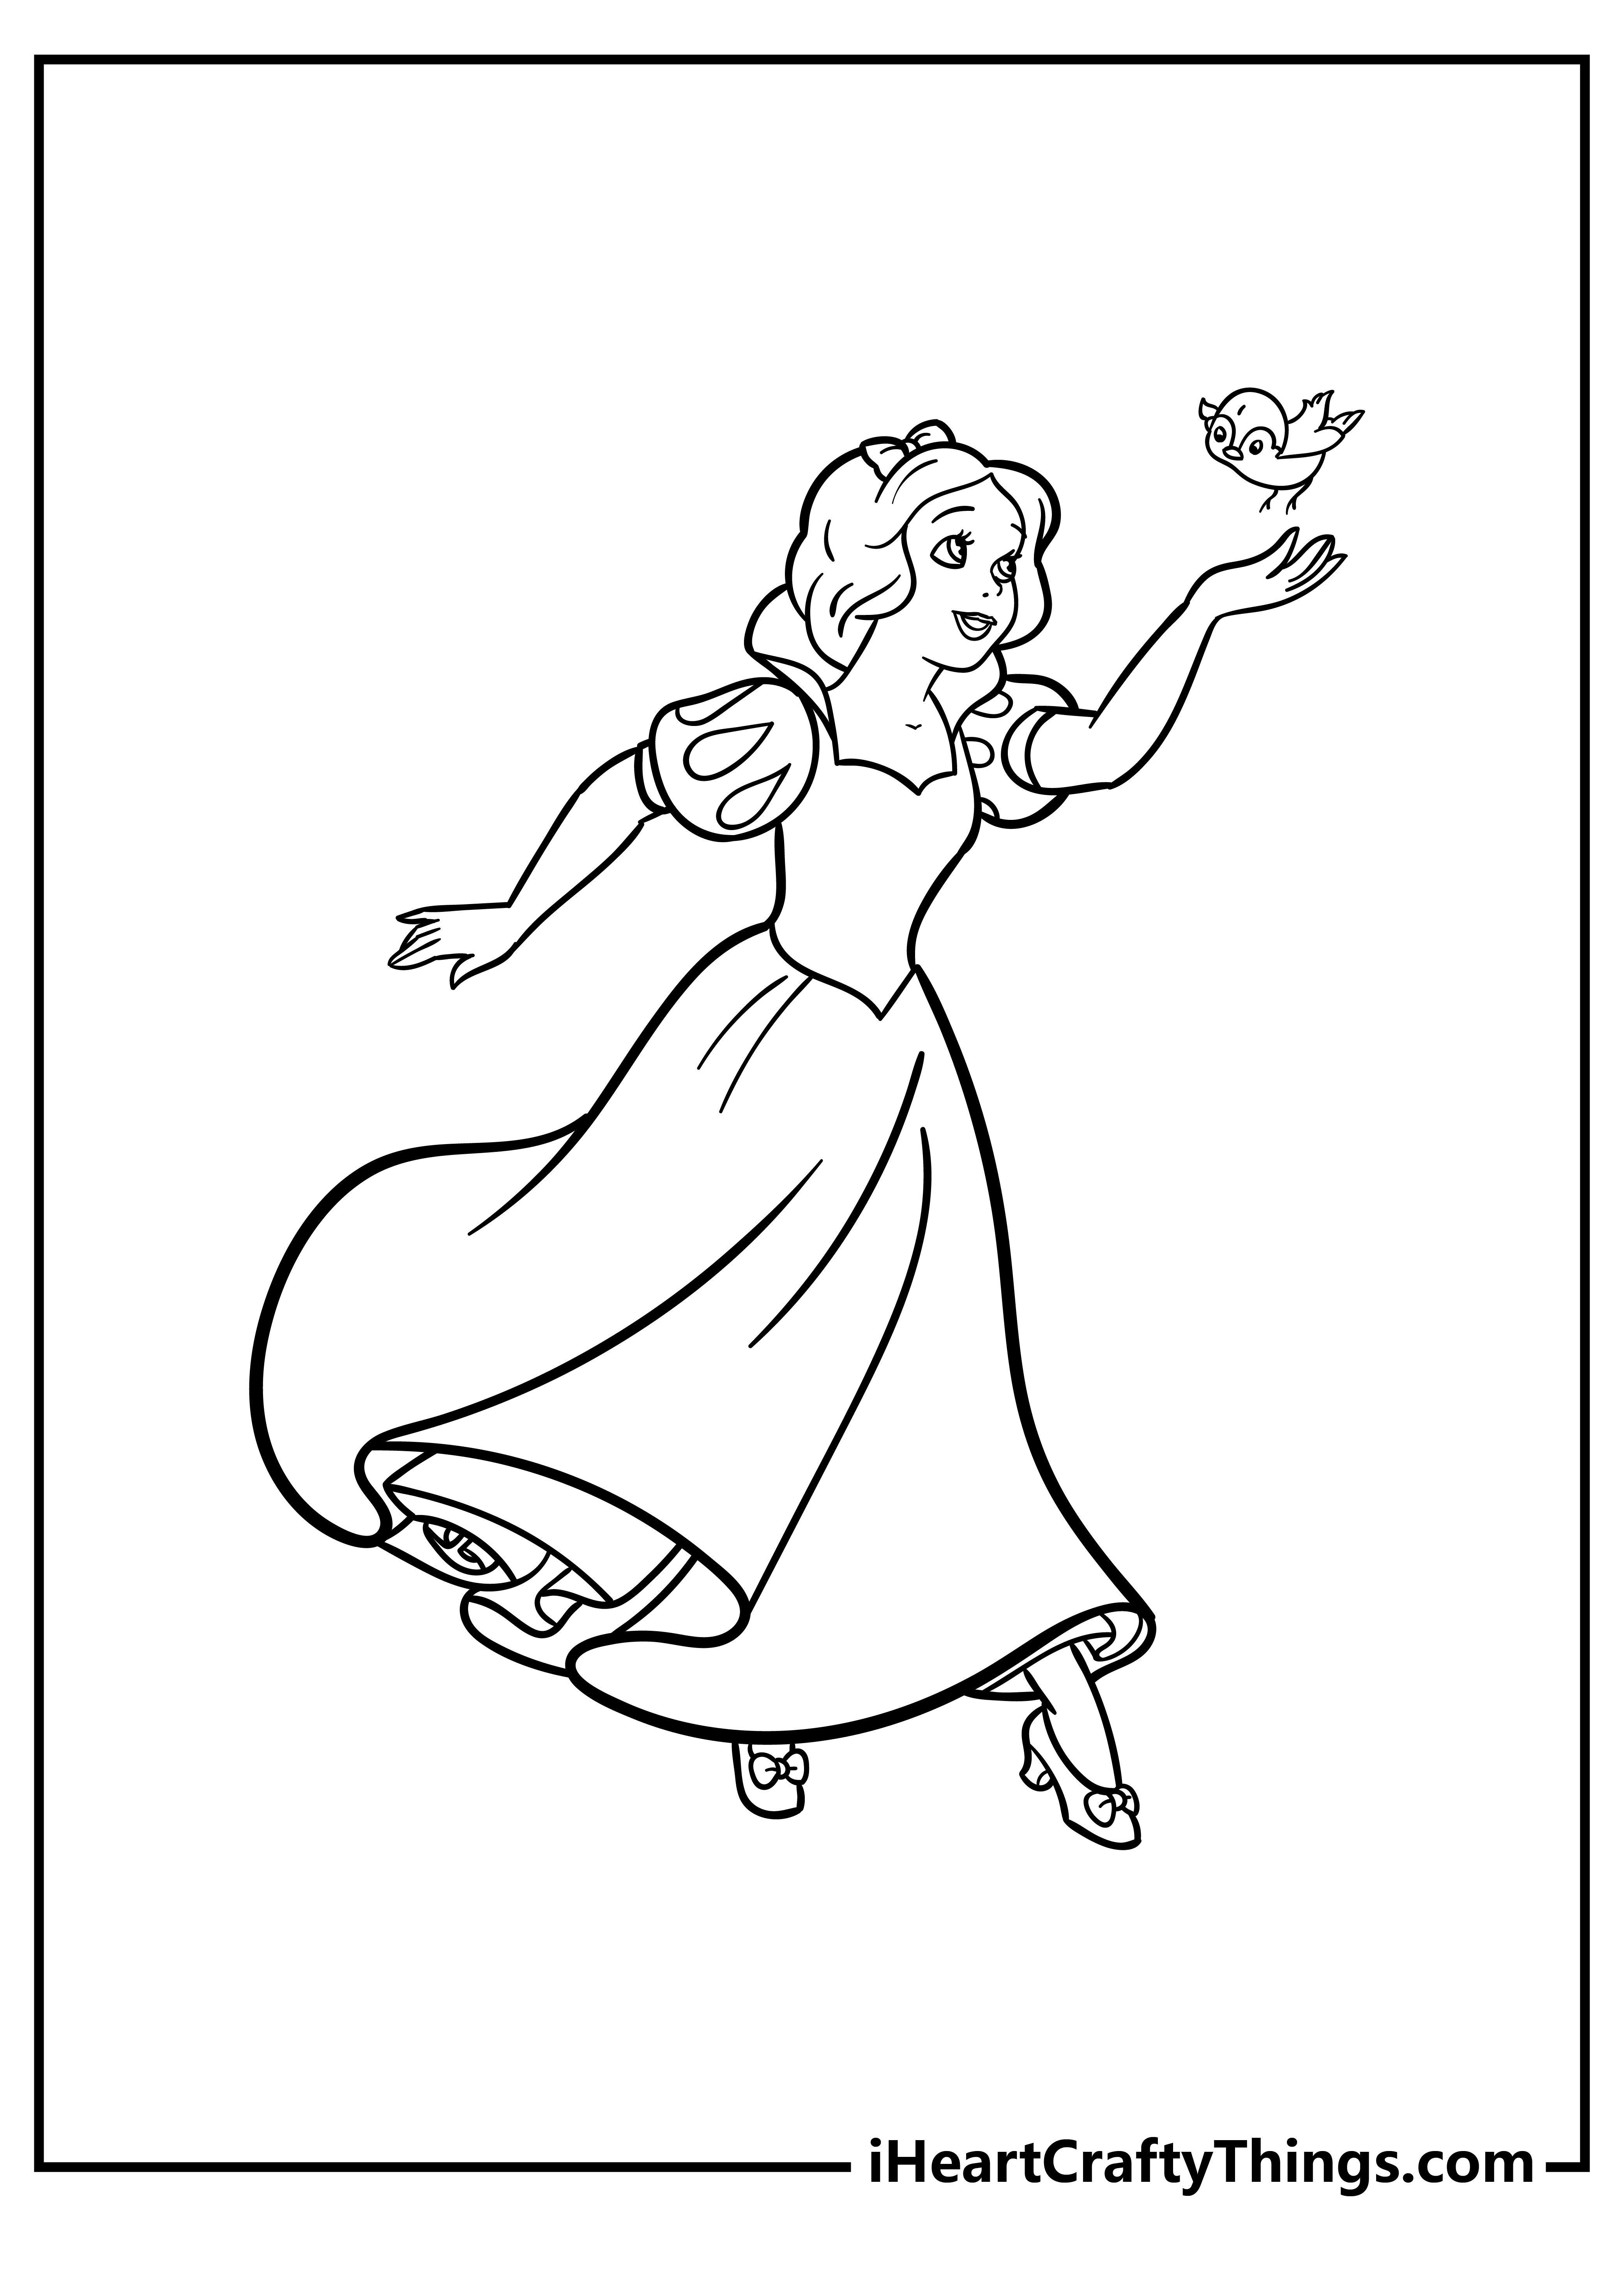 Snow White Coloring Sheet for children free download